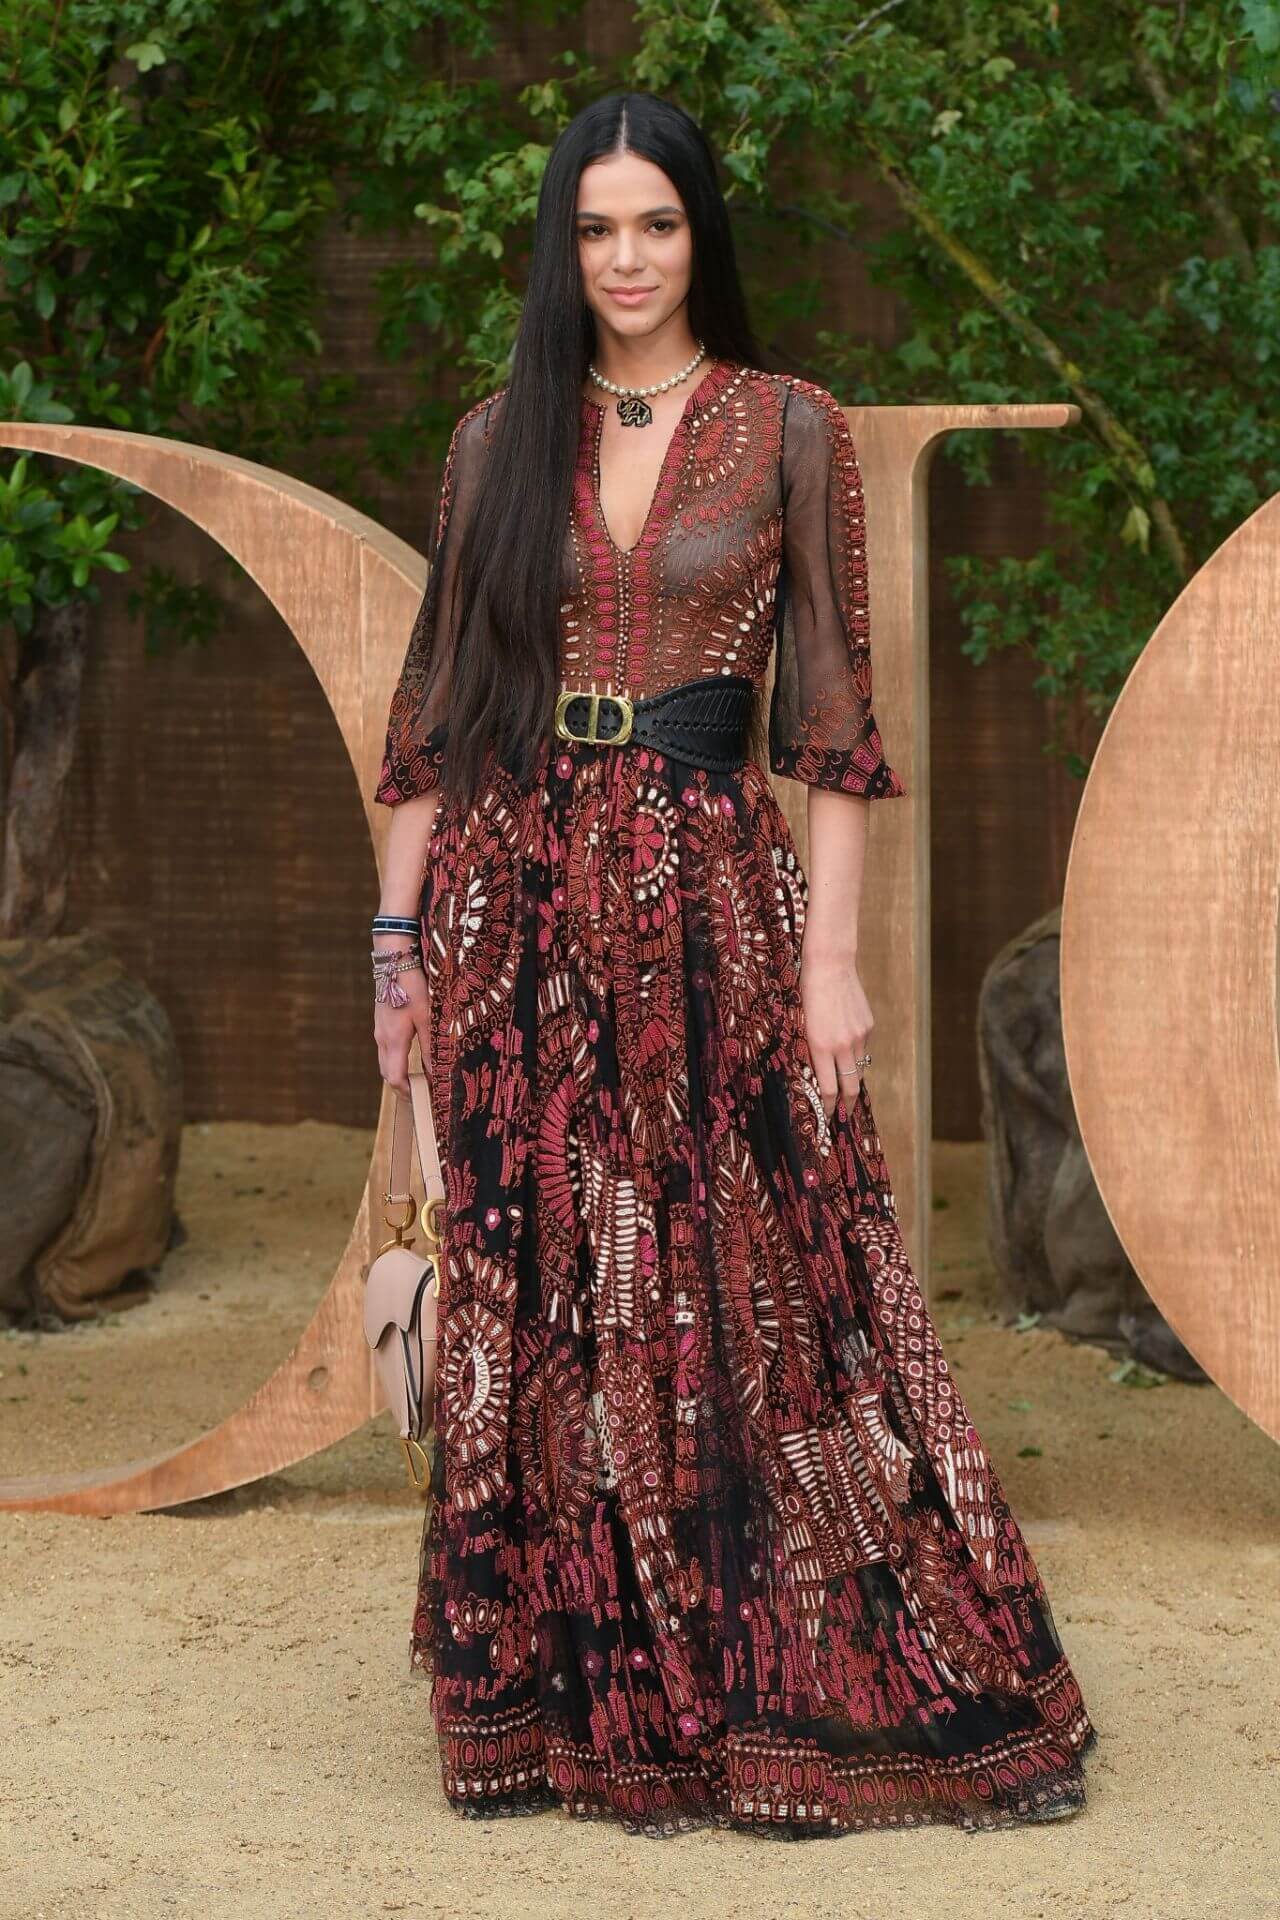 Bruna Marquezine  In Maroon Embroidery Work Full Sleeves Maxi Dress At Christian Dior Fashion Show in Paris